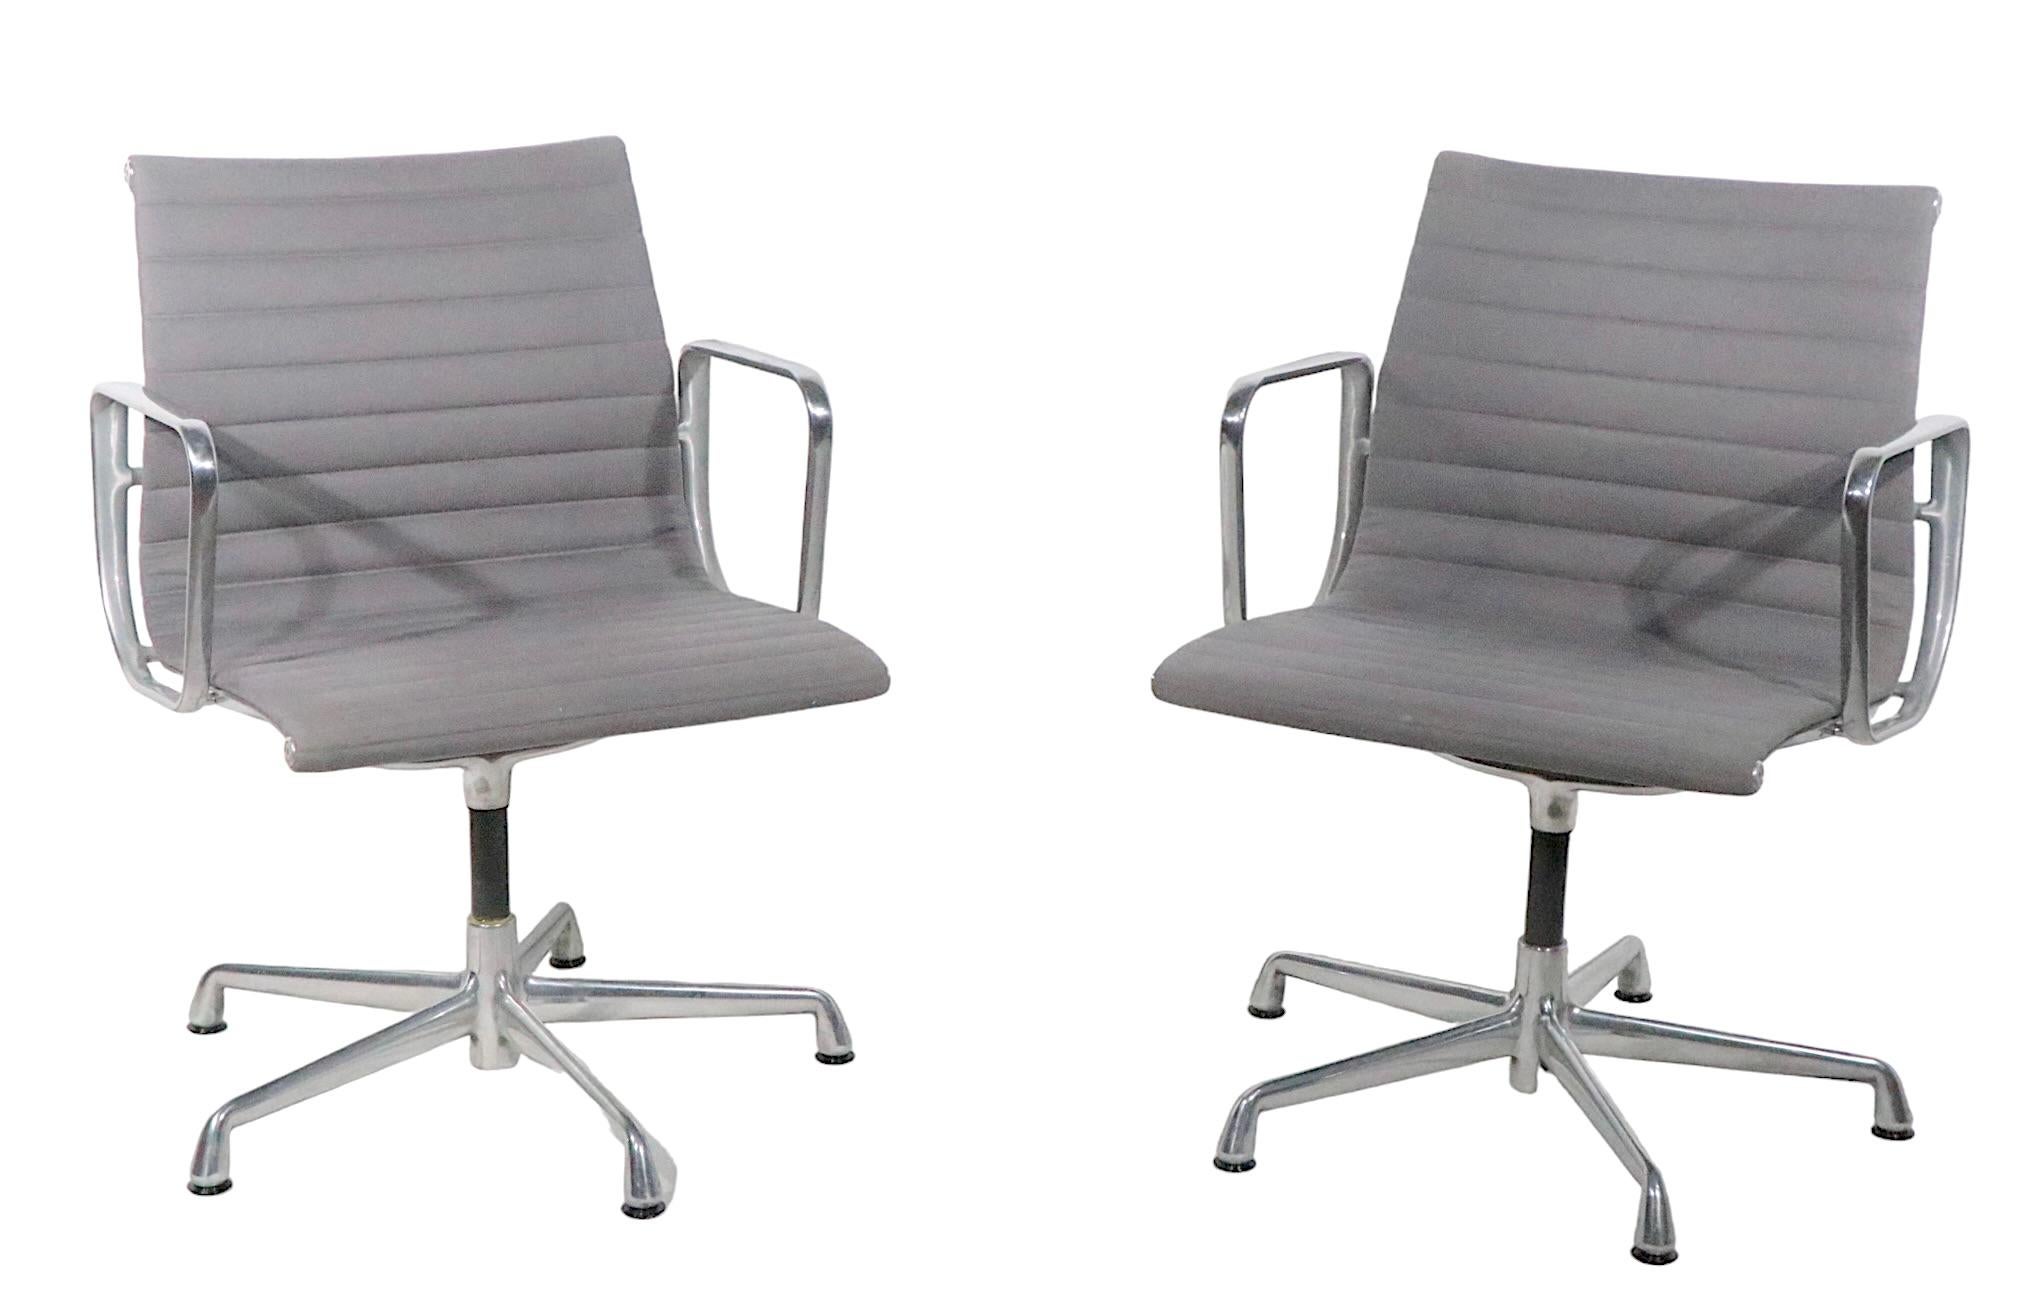 Eames Management Chairs in Grey Fabric Upholstery c. 1980 - 1990s 4 Available  For Sale 8